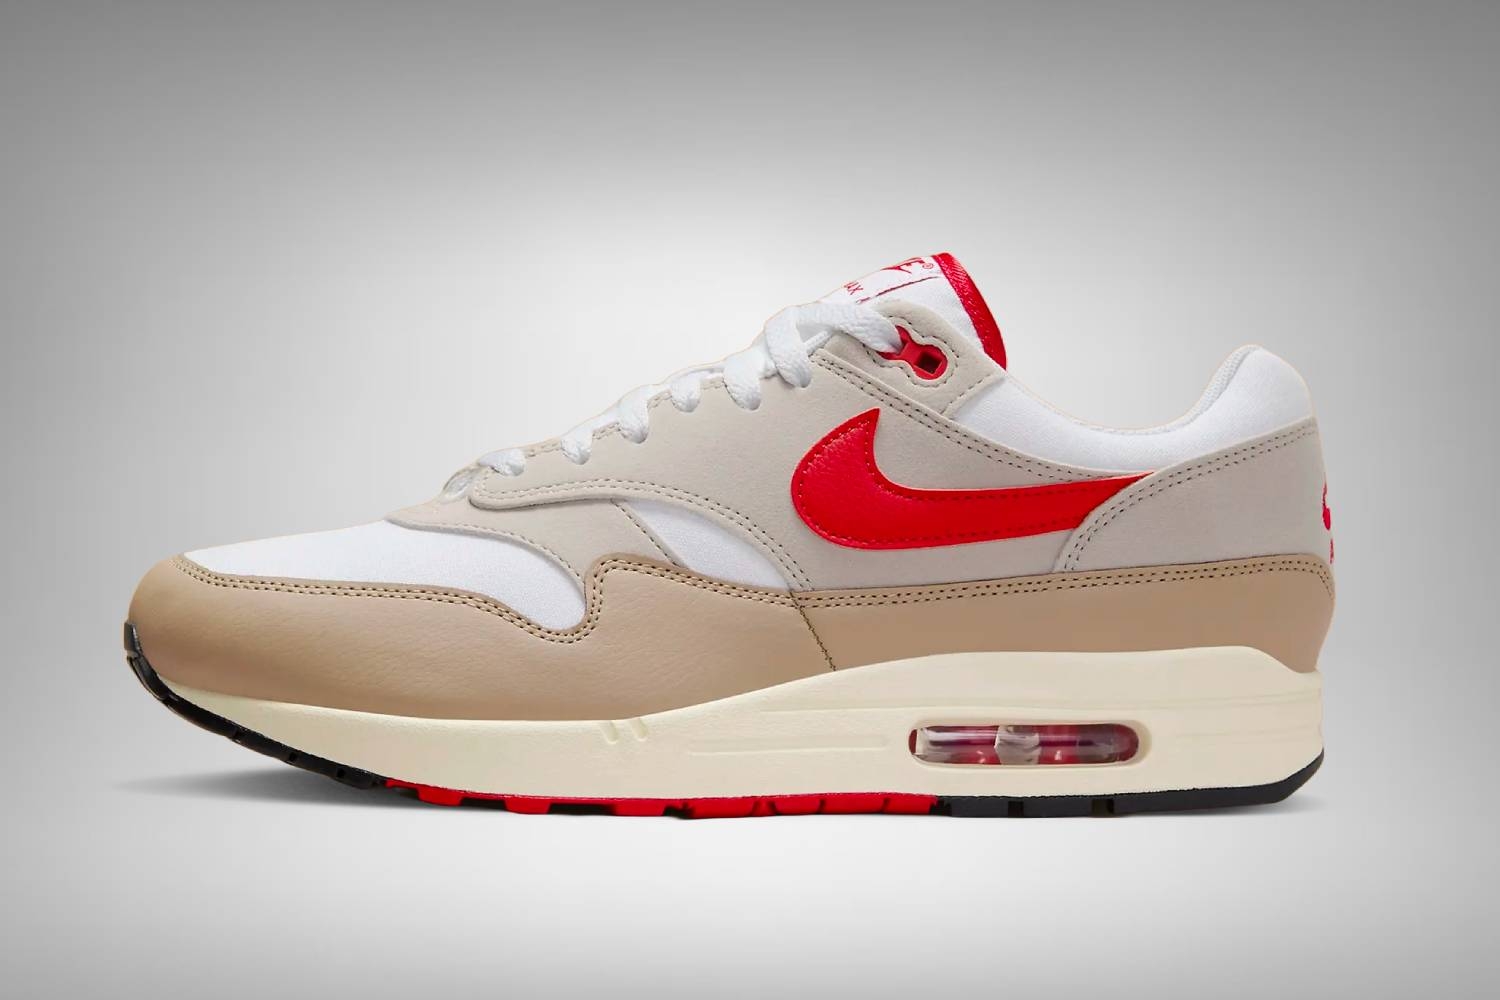 Nike adds an Air Max 1 to its Since '72 pack